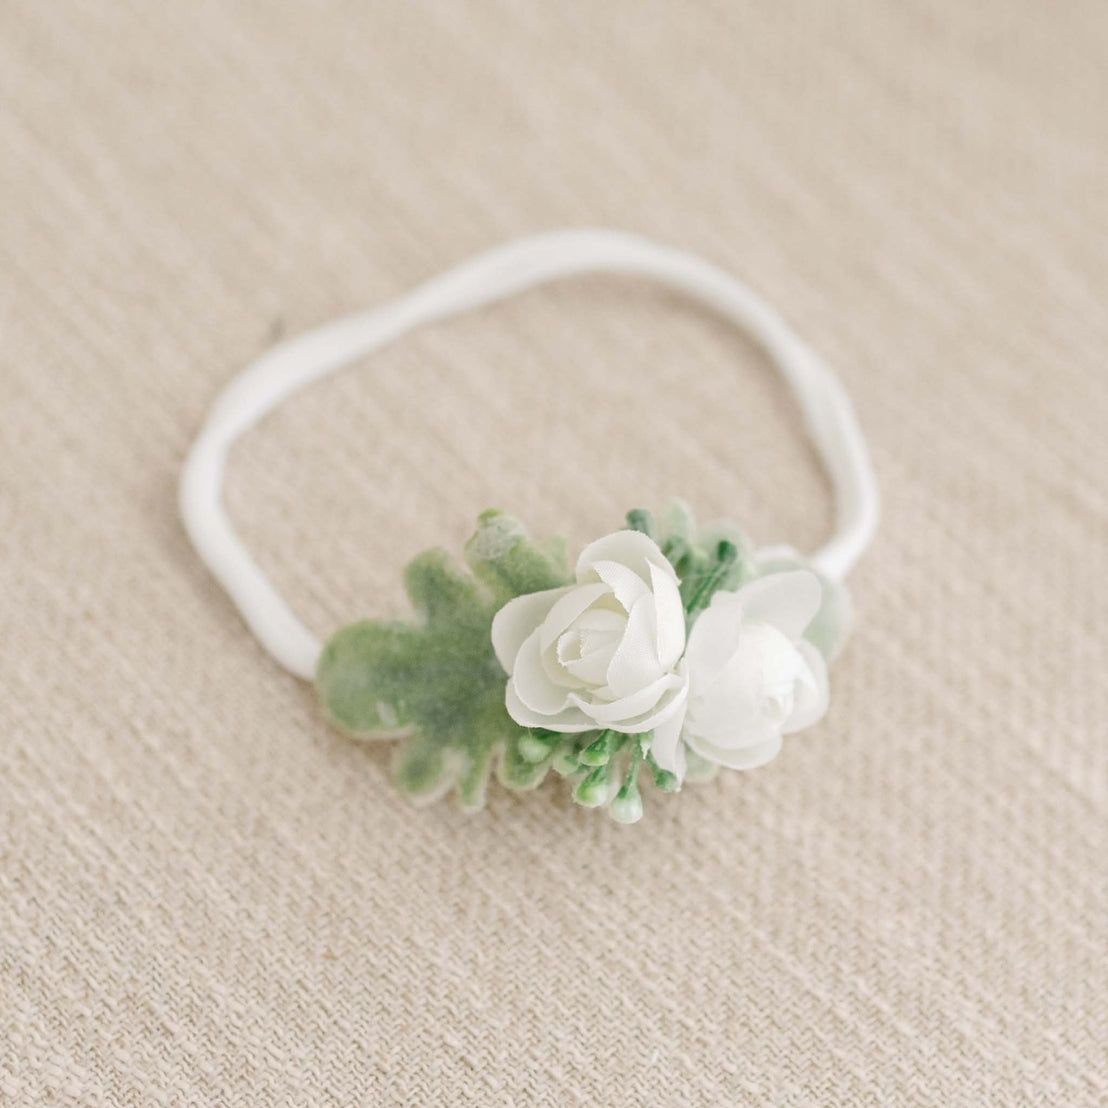 A delicate heirloom Eliza Flower headband featuring white flowers and green leaves on a soft beige fabric background.